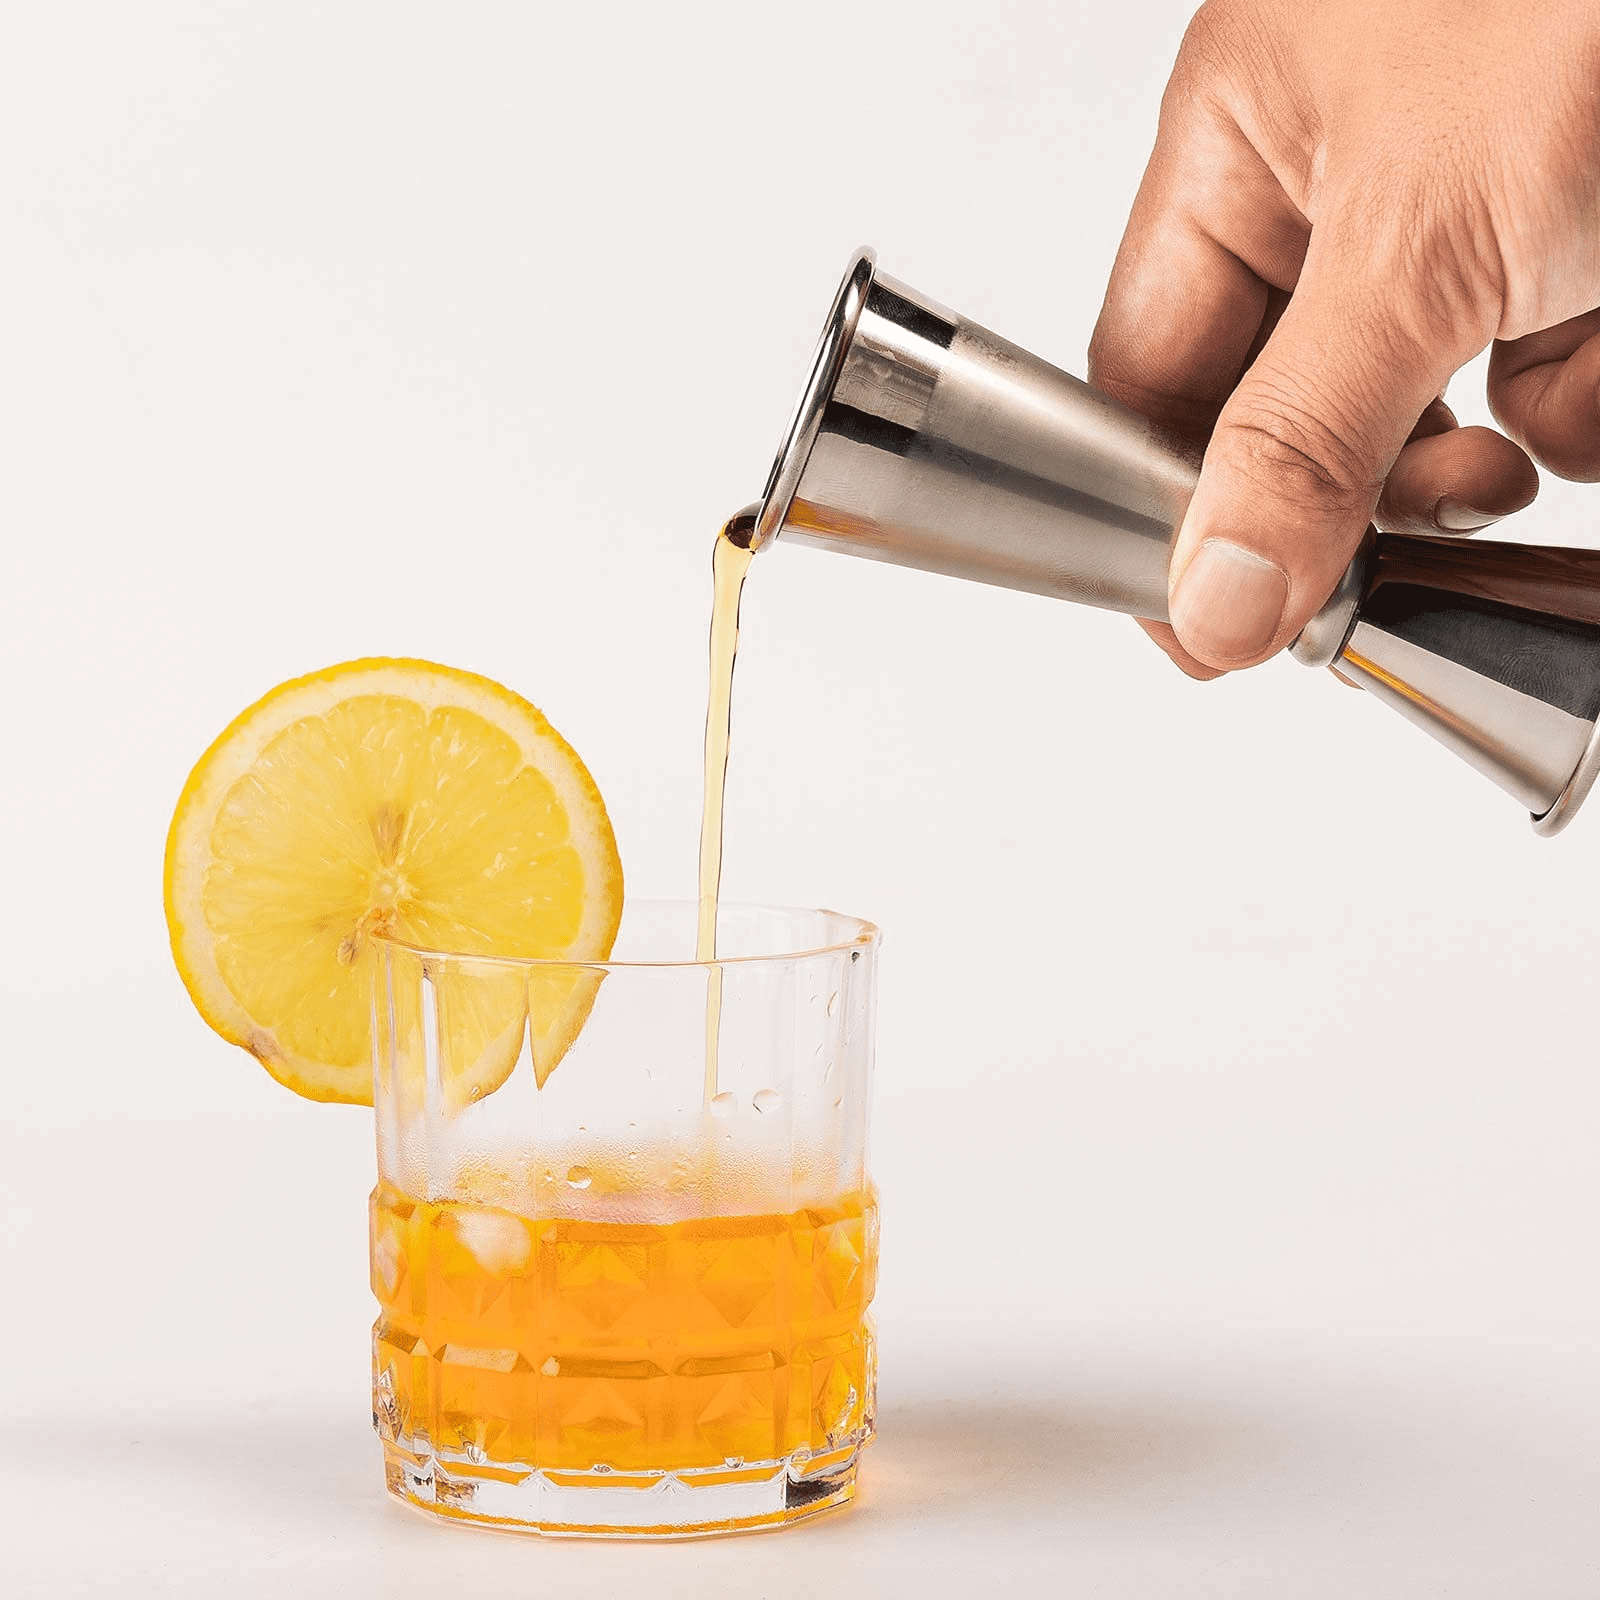 YIYI Guo Double Jigger Cocktail Jiggers Barware Alcohol Measuring Tool,18/8 Stainless Steel,Home Bar Supply Tools Measuring Jigger Cocktail Professional